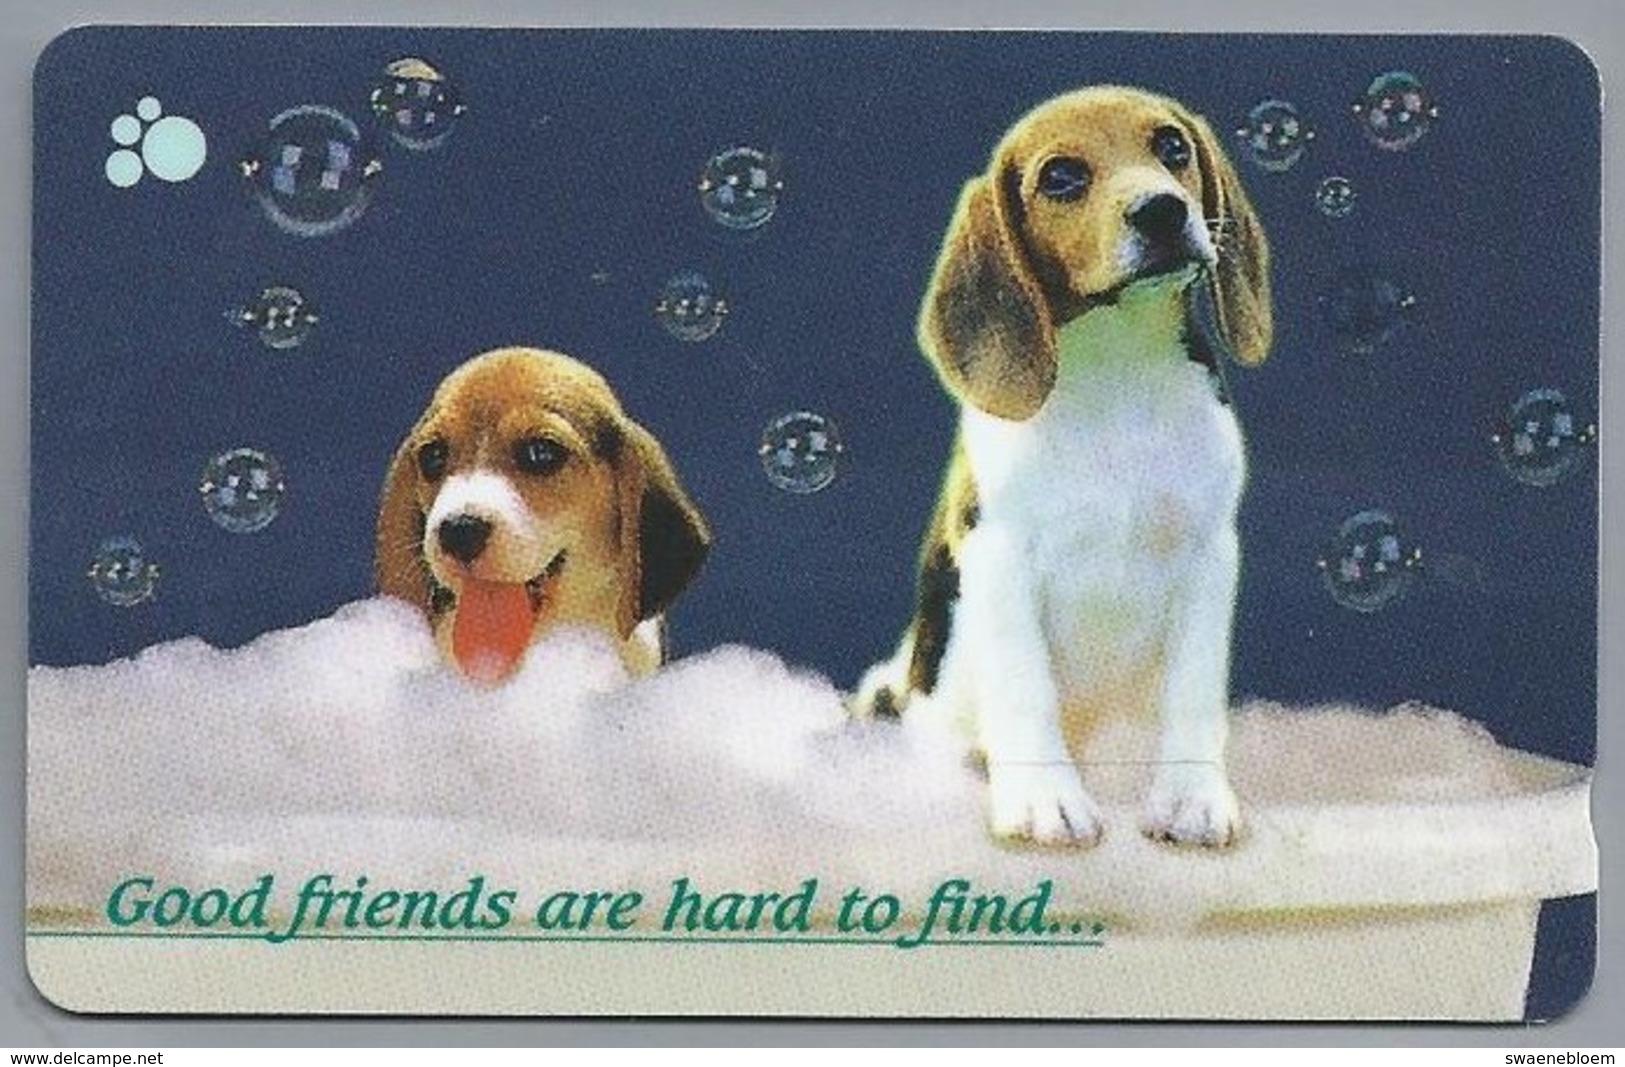 SG.- SINGAPORE TELECOM. $ 10. - Good Friends Are Hard To Find....- 133SIGA -. 2 Scans. - Dogs